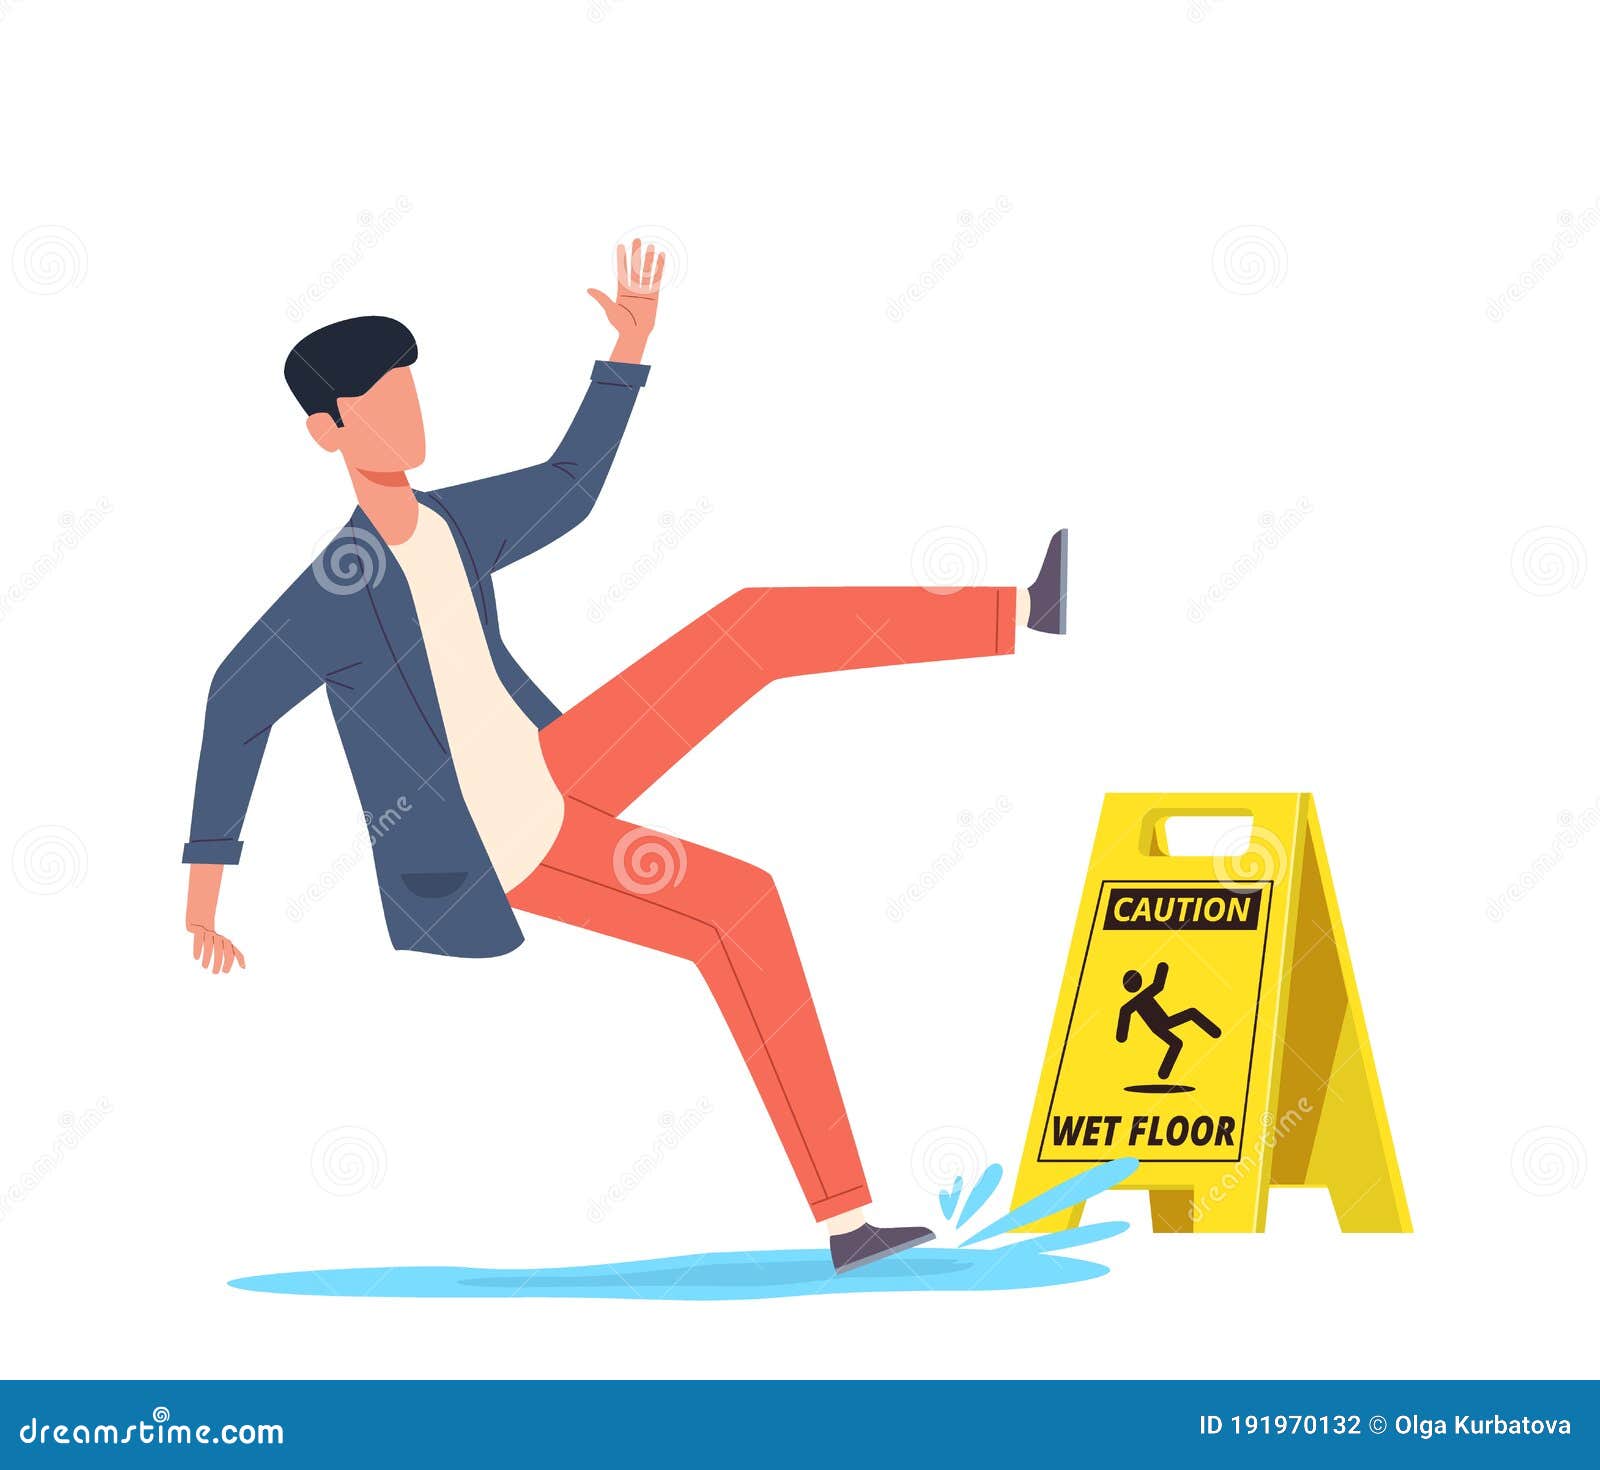 wet floor. falling man slips in water, slipping and downfall, injured character, caution danger wet floor yellow sign